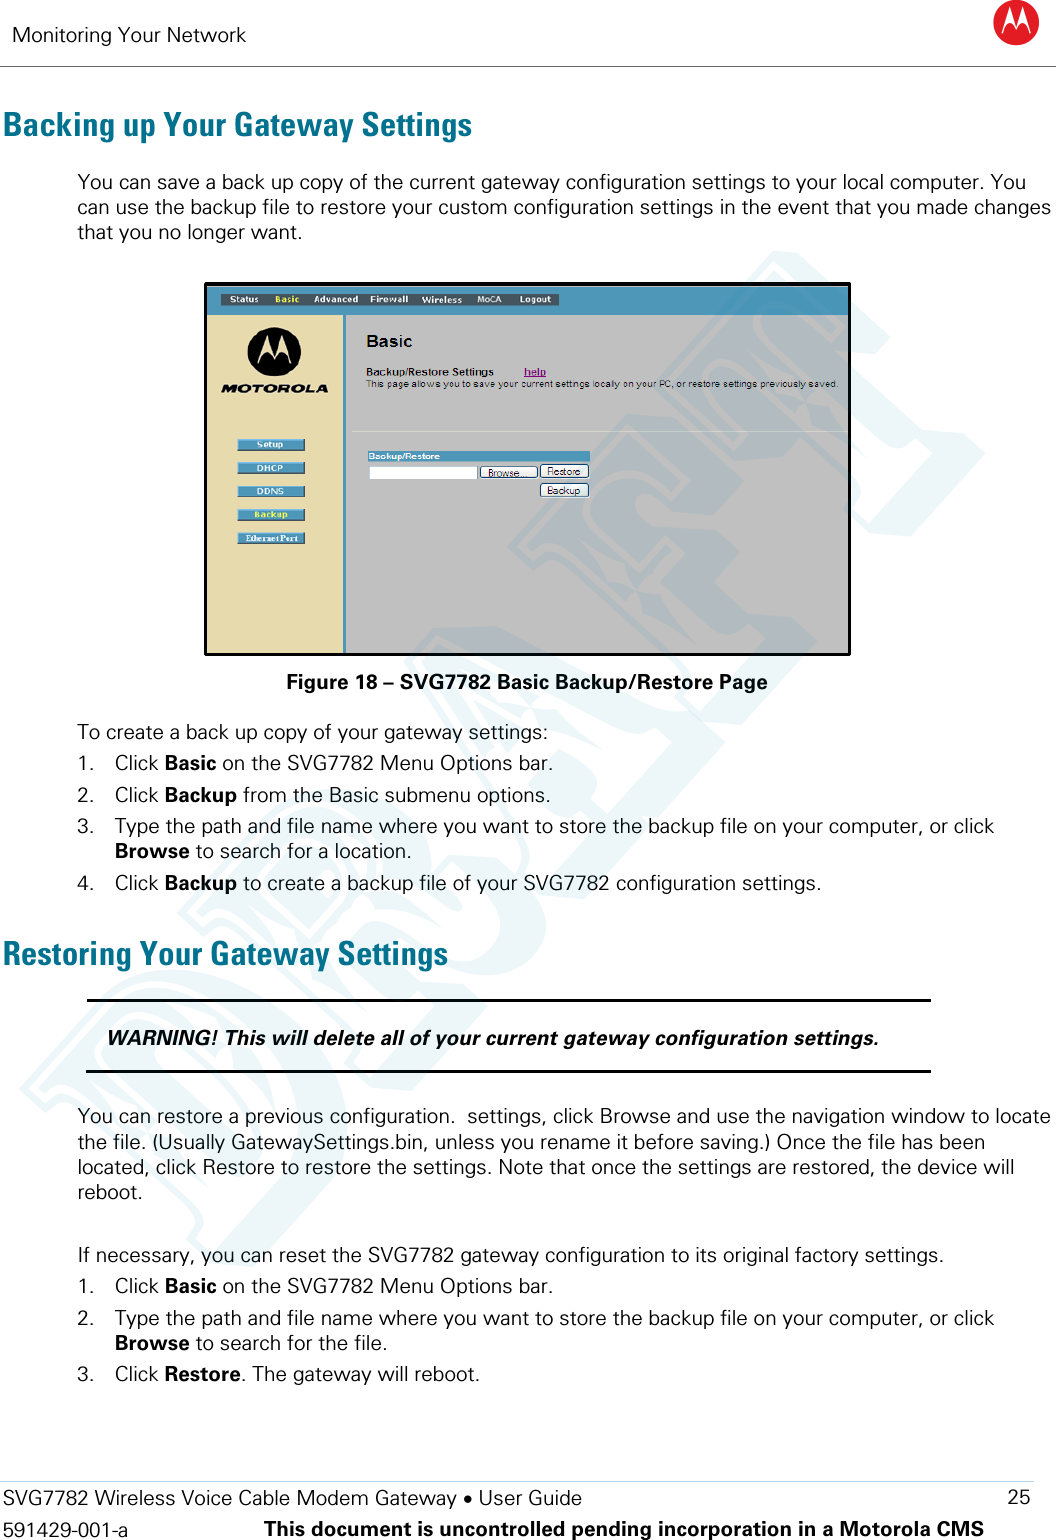 Monitoring Your Network B  SVG7782 Wireless Voice Cable Modem Gateway • User Guide 25 591429-001-a This document is uncontrolled pending incorporation in a Motorola CMS  Backing up Your Gateway Settings You can save a back up copy of the current gateway configuration settings to your local computer. You can use the backup file to restore your custom configuration settings in the event that you made changes that you no longer want.   Figure 18 – SVG7782 Basic Backup/Restore Page To create a back up copy of your gateway settings: 1. Click Basic on the SVG7782 Menu Options bar. 2. Click Backup from the Basic submenu options. 3. Type the path and file name where you want to store the backup file on your computer, or click Browse to search for a location. 4. Click Backup to create a backup file of your SVG7782 configuration settings. Restoring Your Gateway Settings  WARNING! This will delete all of your current gateway configuration settings.  You can restore a previous configuration.  settings, click Browse and use the navigation window to locate the file. (Usually GatewaySettings.bin, unless you rename it before saving.) Once the file has been located, click Restore to restore the settings. Note that once the settings are restored, the device will reboot.  If necessary, you can reset the SVG7782 gateway configuration to its original factory settings.  1. Click Basic on the SVG7782 Menu Options bar. 2. Type the path and file name where you want to store the backup file on your computer, or click Browse to search for the file. 3. Click Restore. The gateway will reboot.   DRAFT